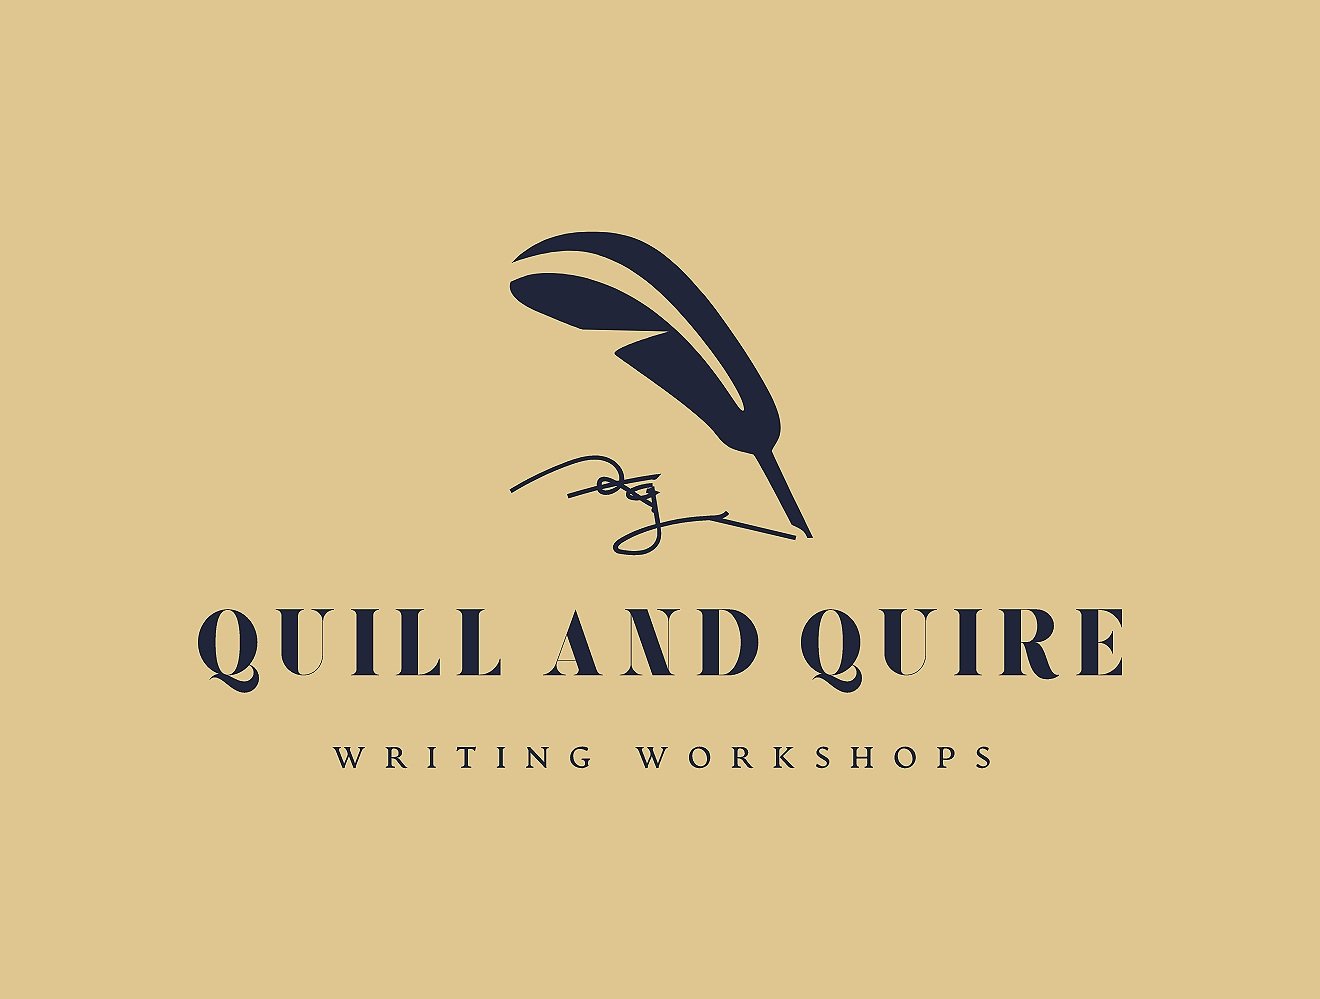 Quill and Quire